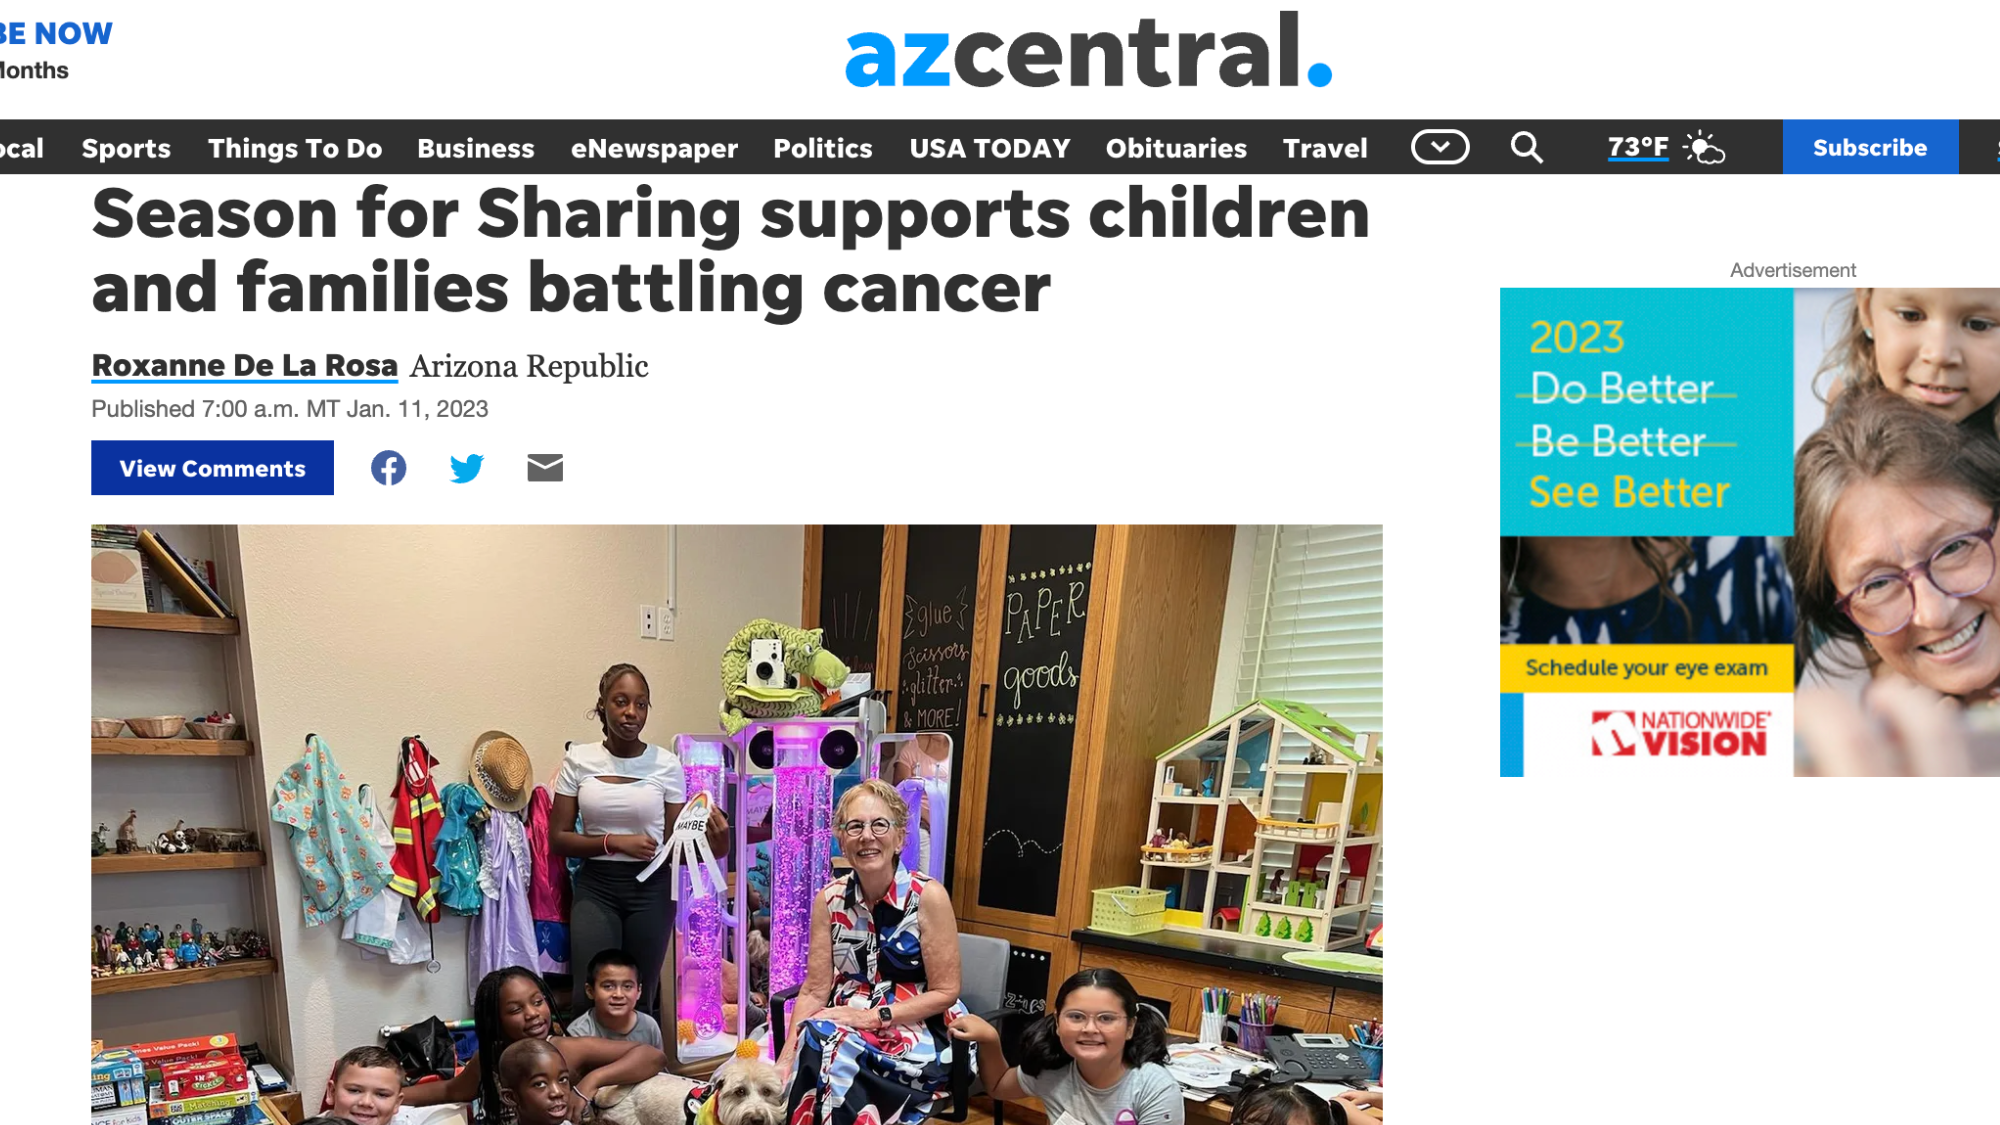 az central: "Season for Sharing supports children and families battling cancer"